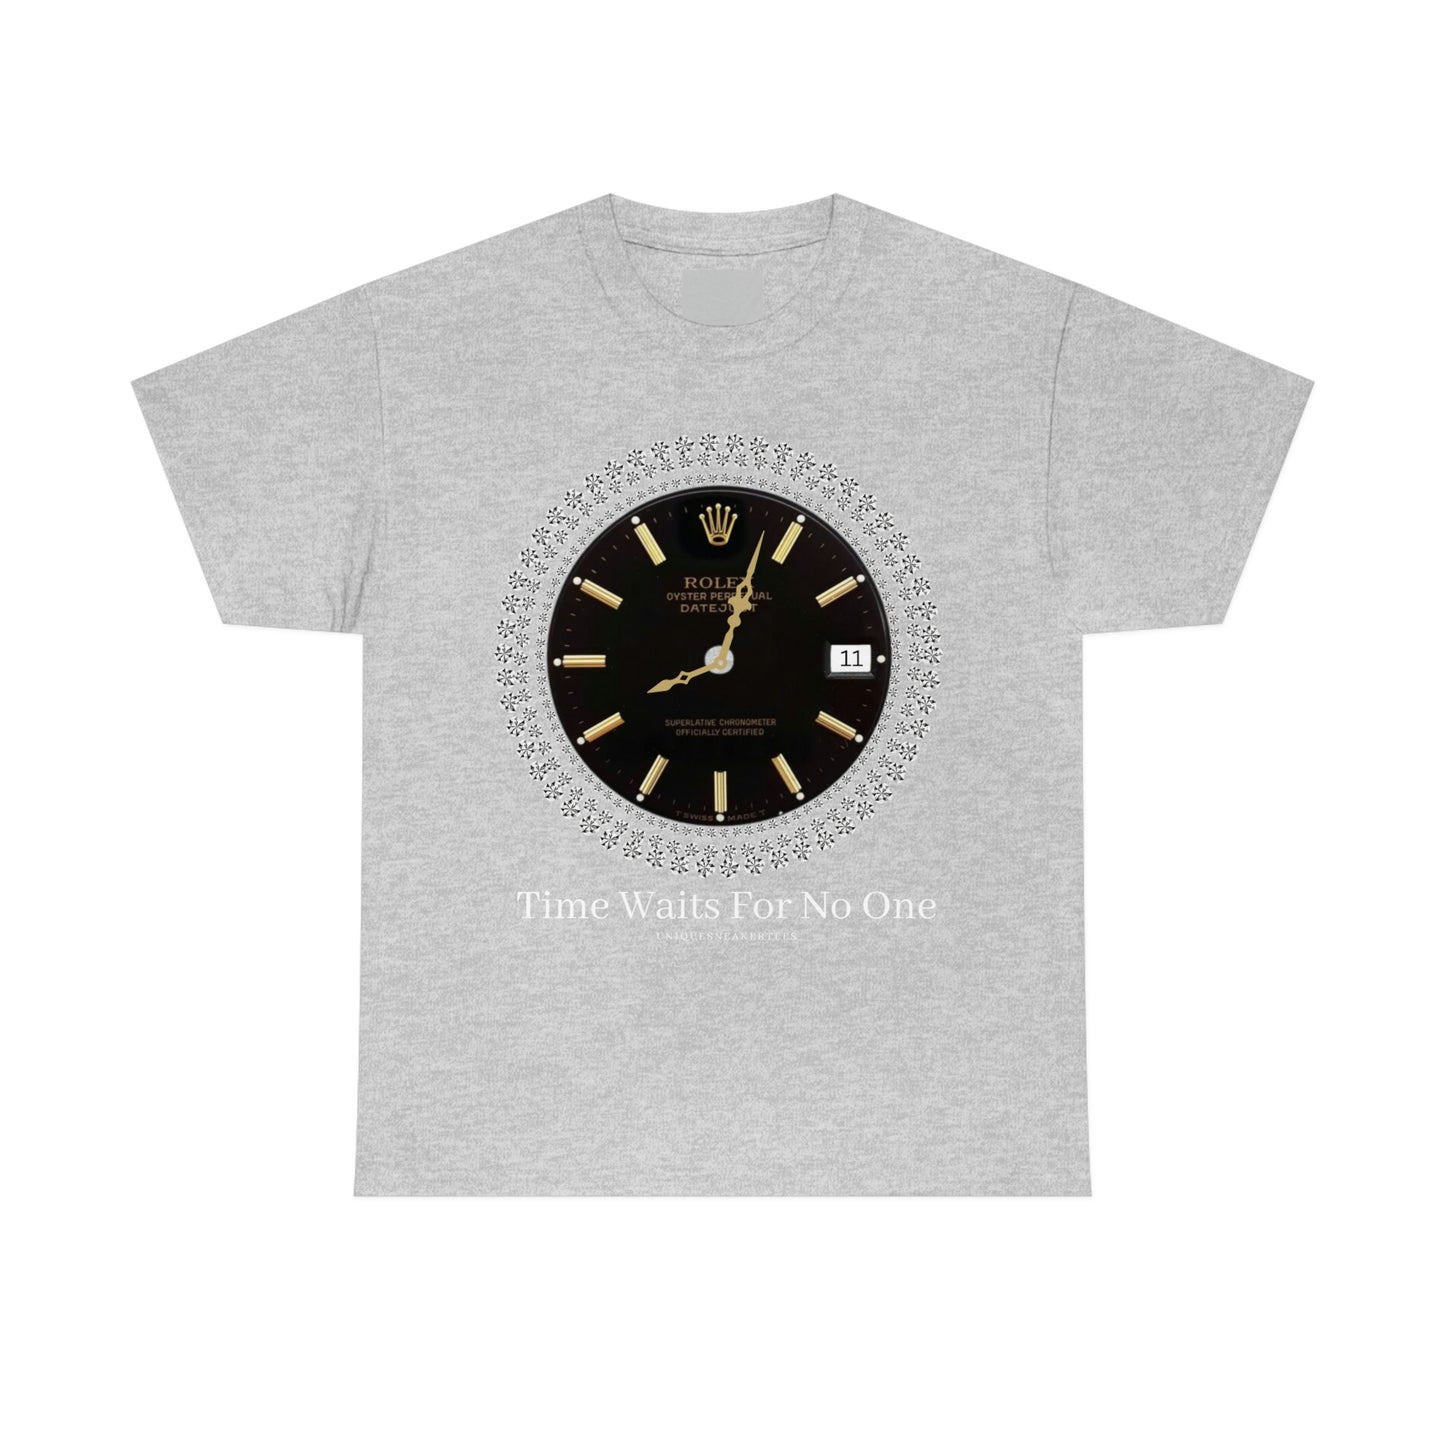 Time Waits For No One Tee